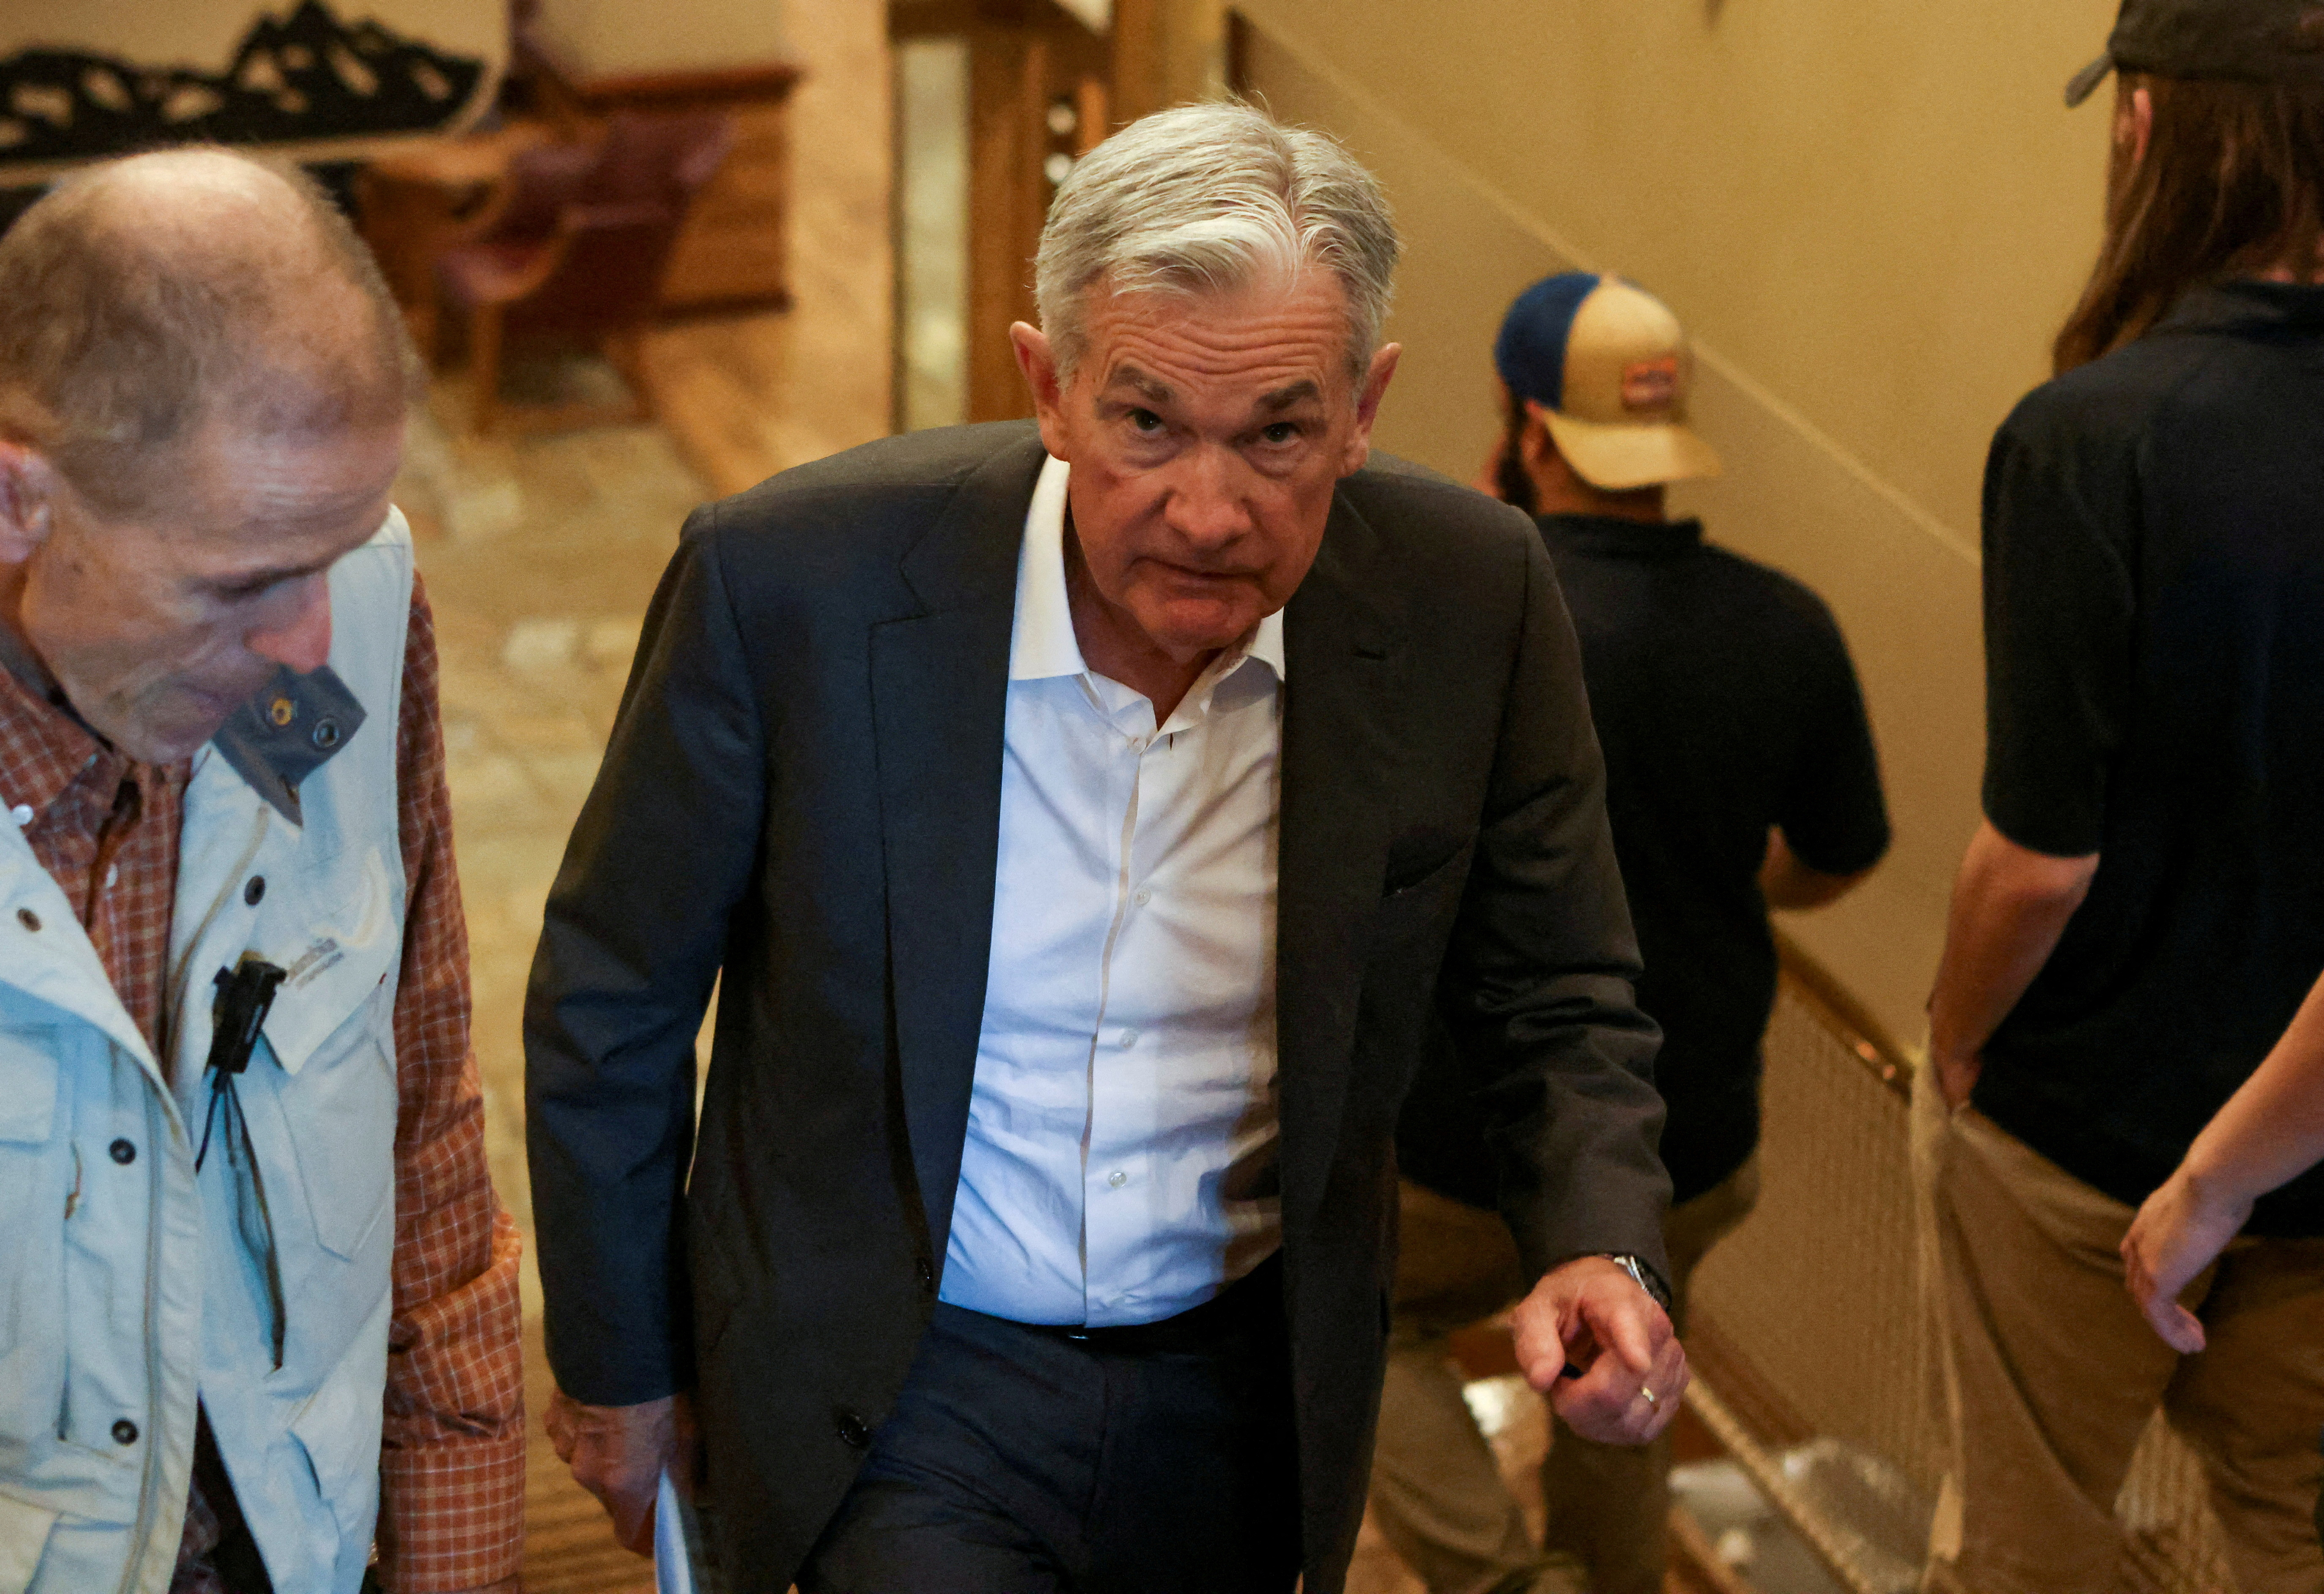 Federal Reserve Chair Jerome Powell at the Jackson Hole economic symposium